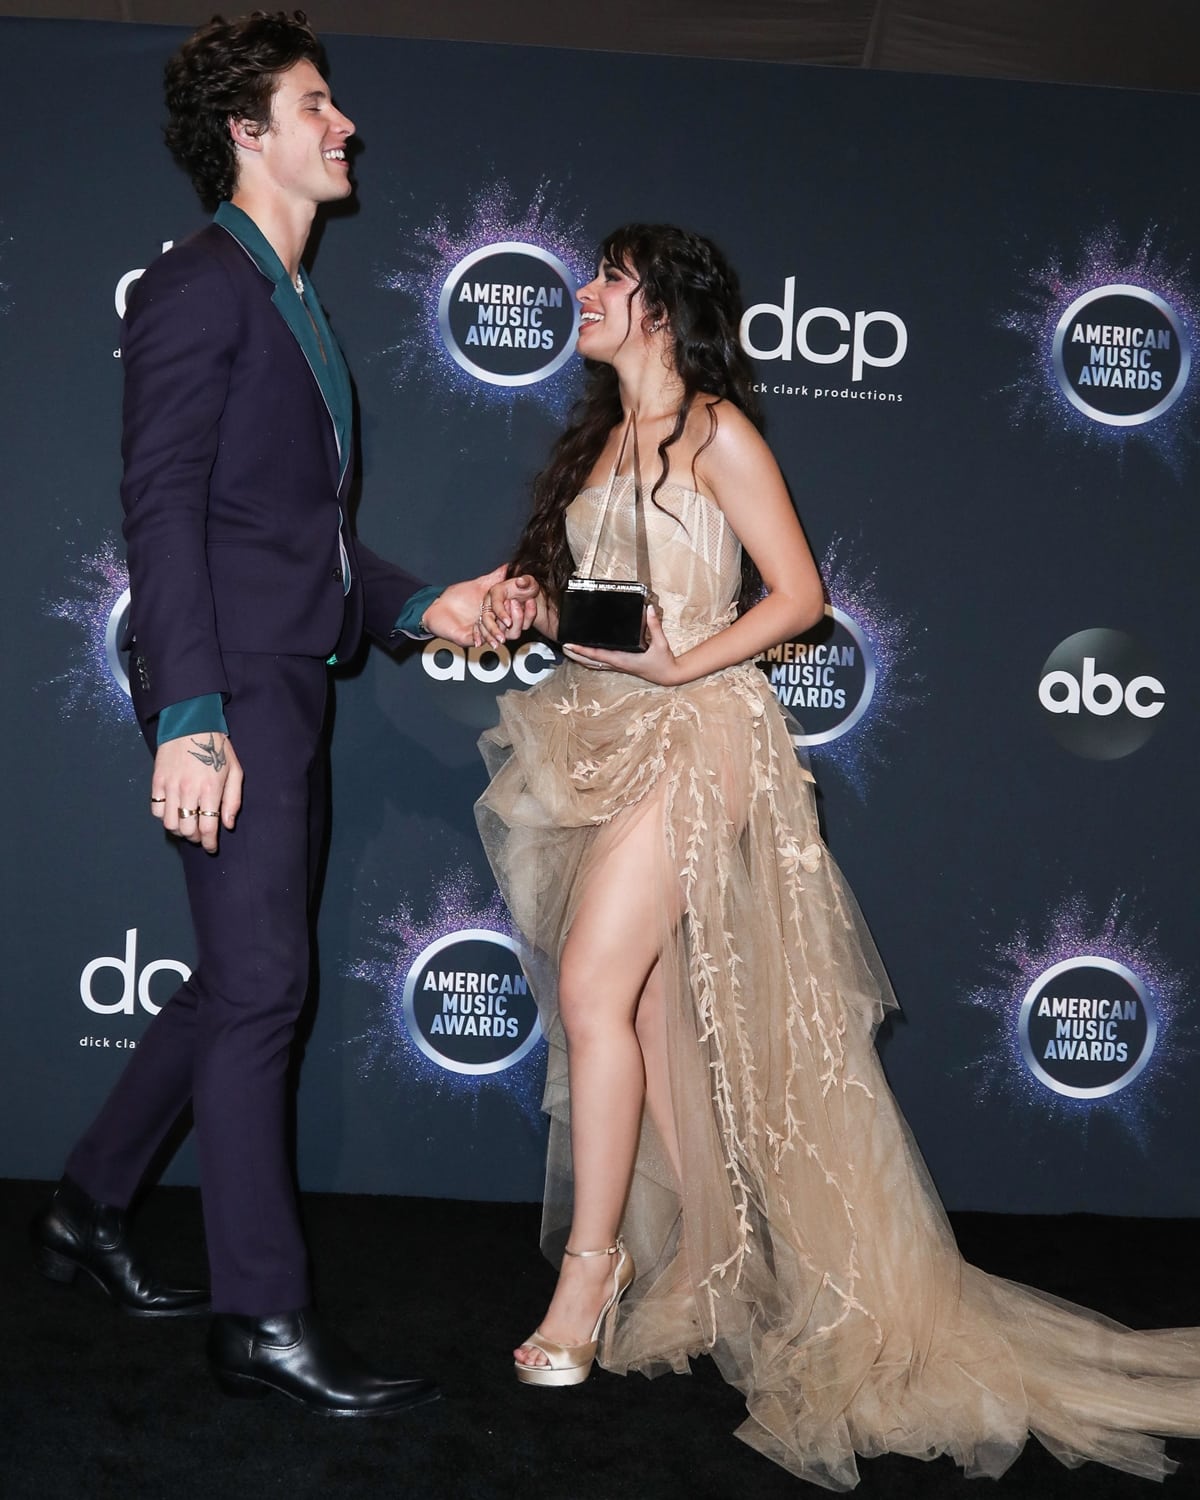 Shawn Mendes split from his much shorter girlfriend Camila Cabello in November 2021